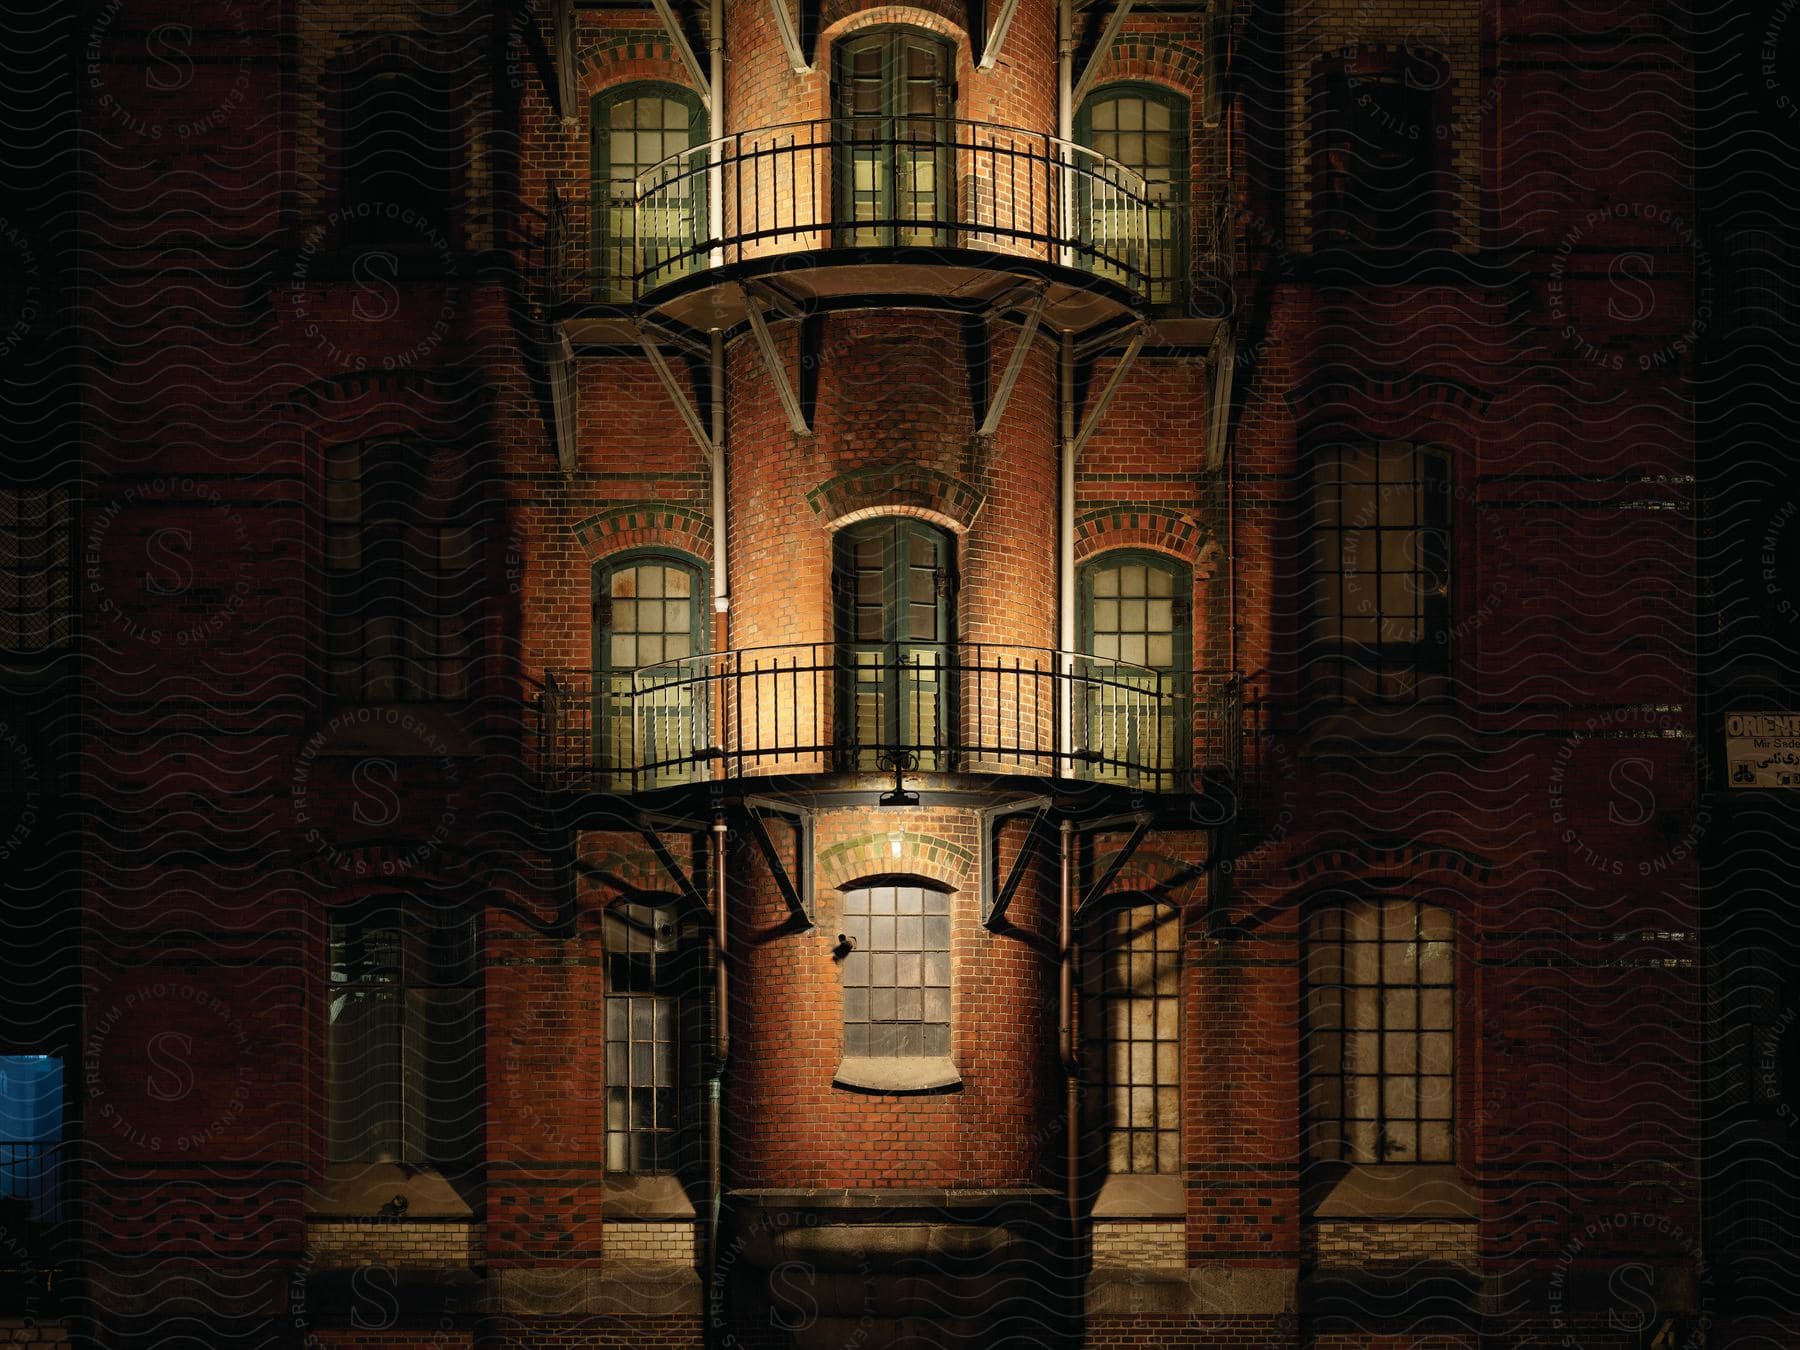 A building with multiple windows and balconies at night